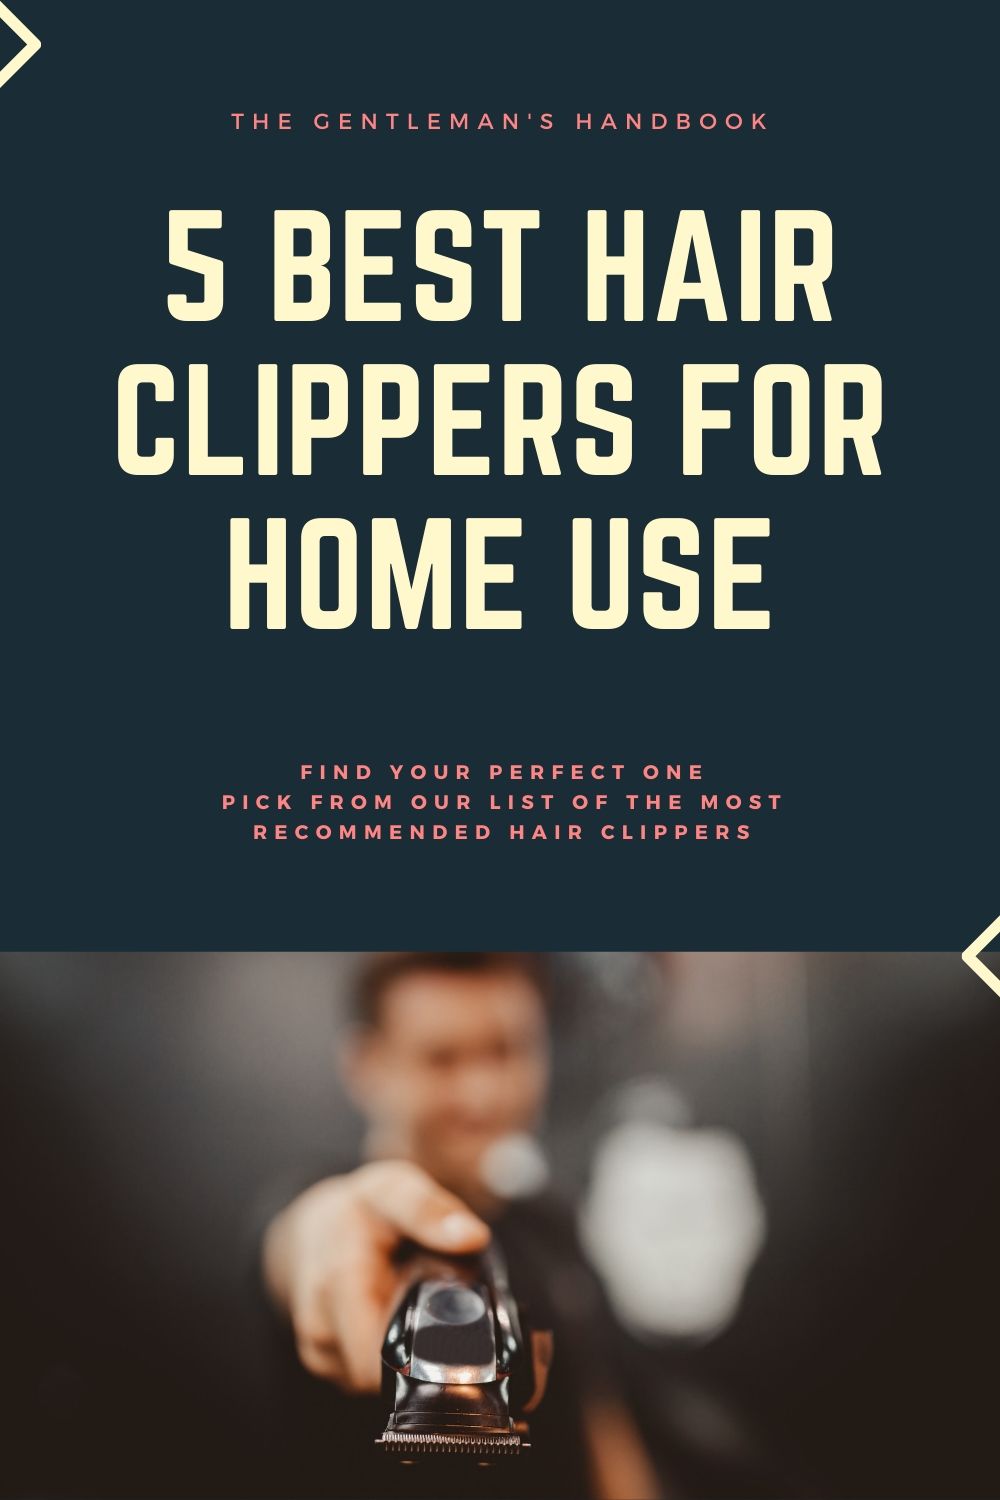 The 5 Best Hair Clippers For Home Use